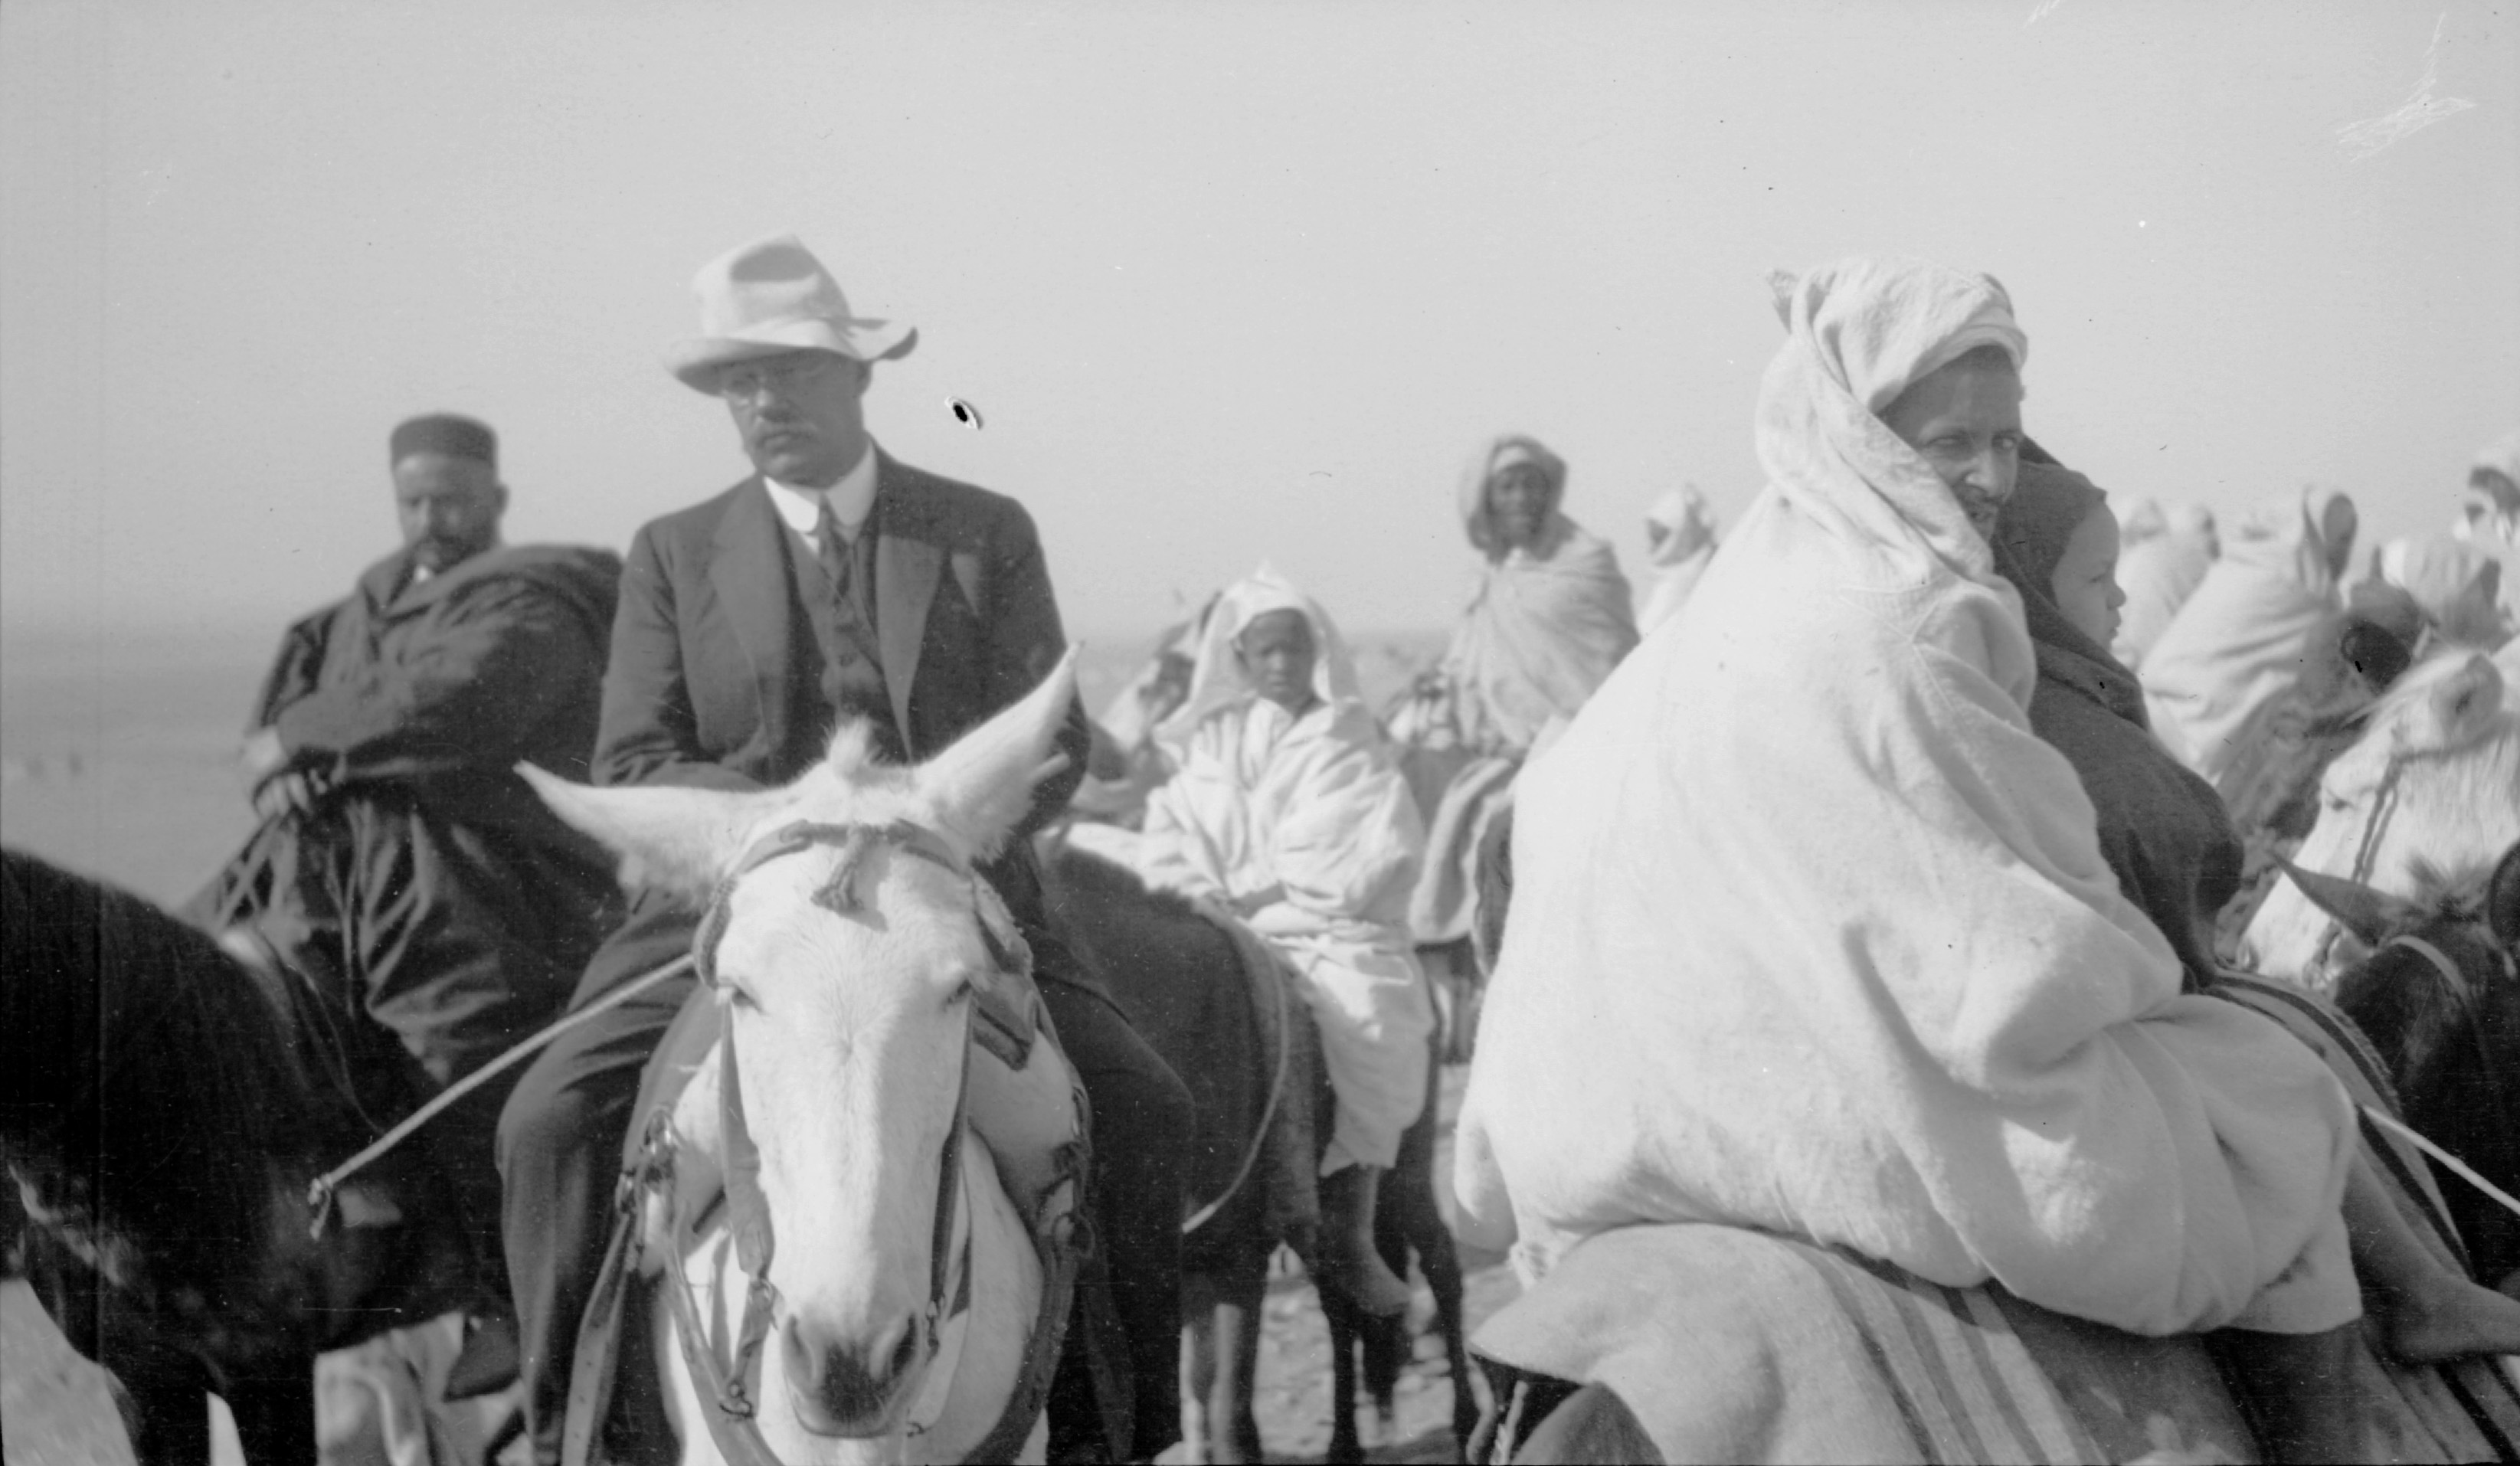 Edvard Westermarck in Morocco on a white horse. Abdessalam el Bakkali to the left.